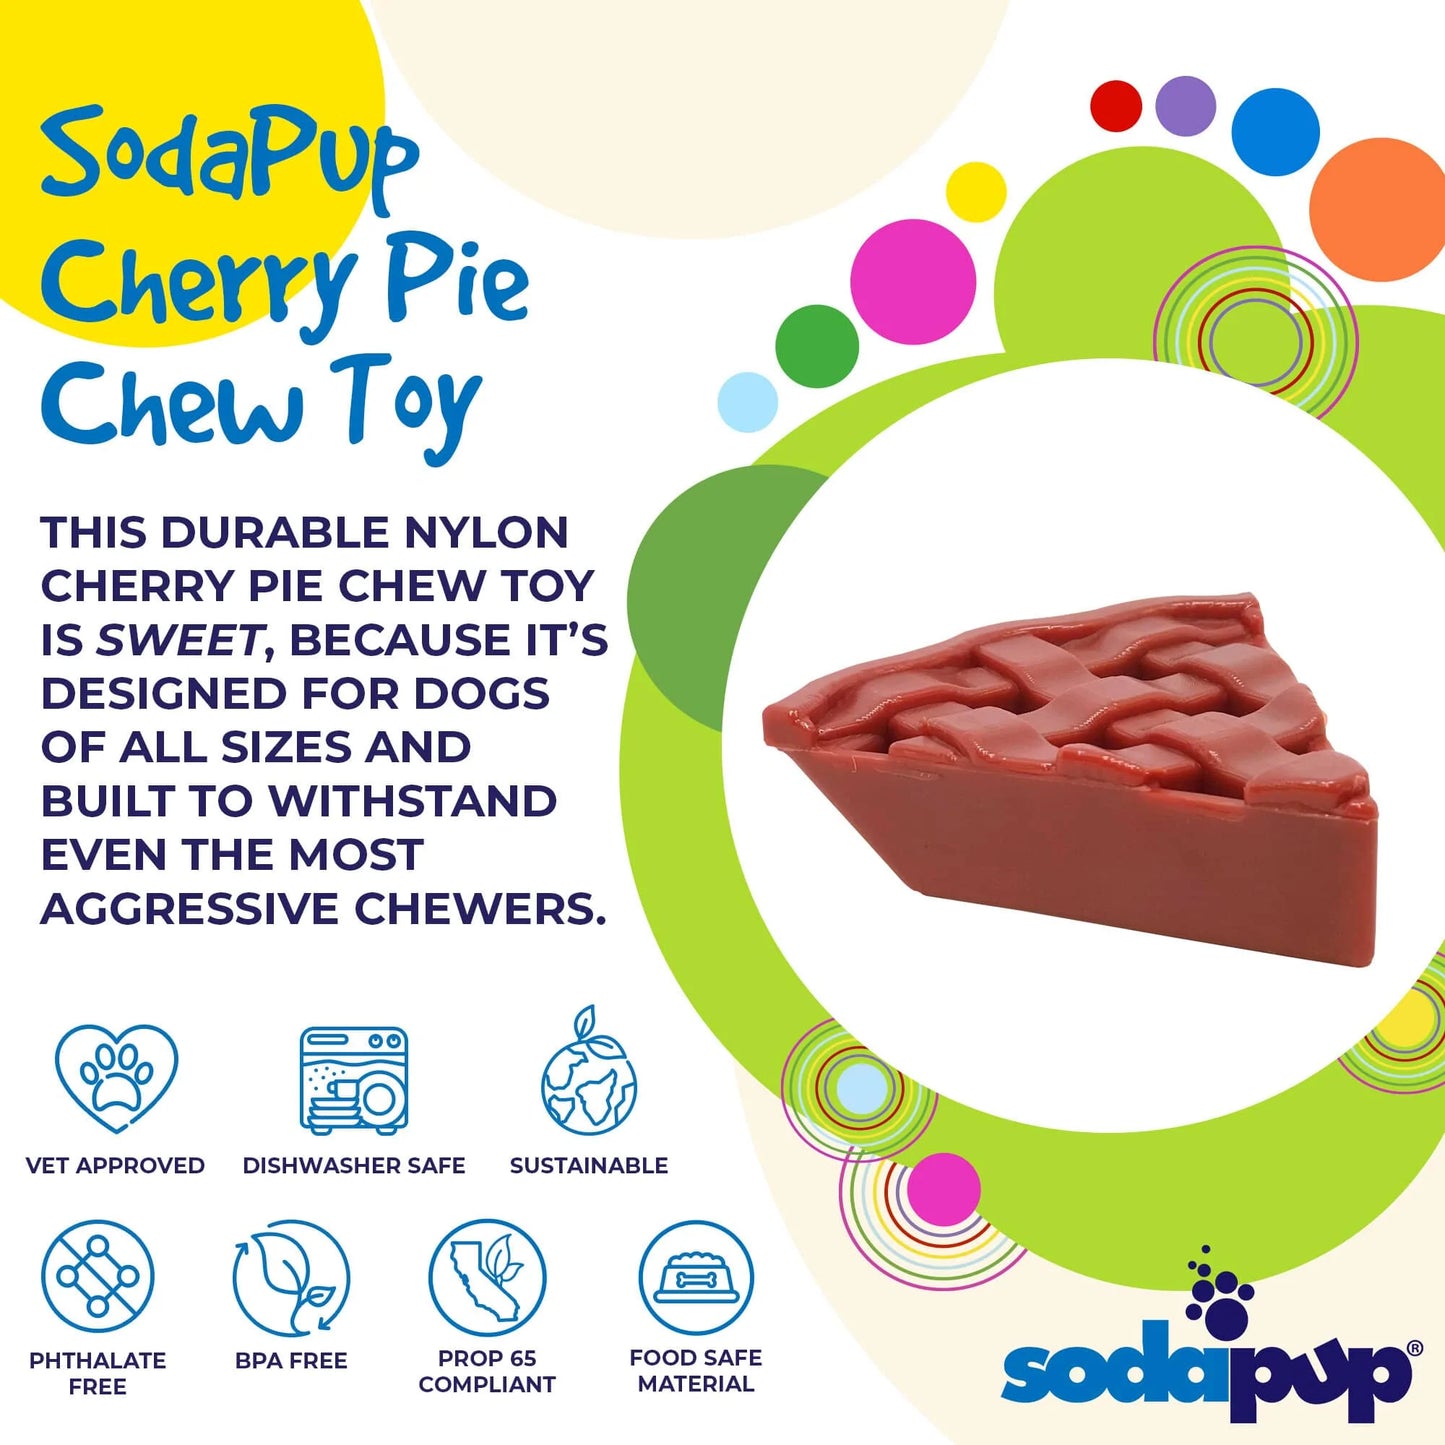 SodaPup Cherry Pie Ultra Durable Nylon Dog Chew and Treat Holder for Aggressive Chewers